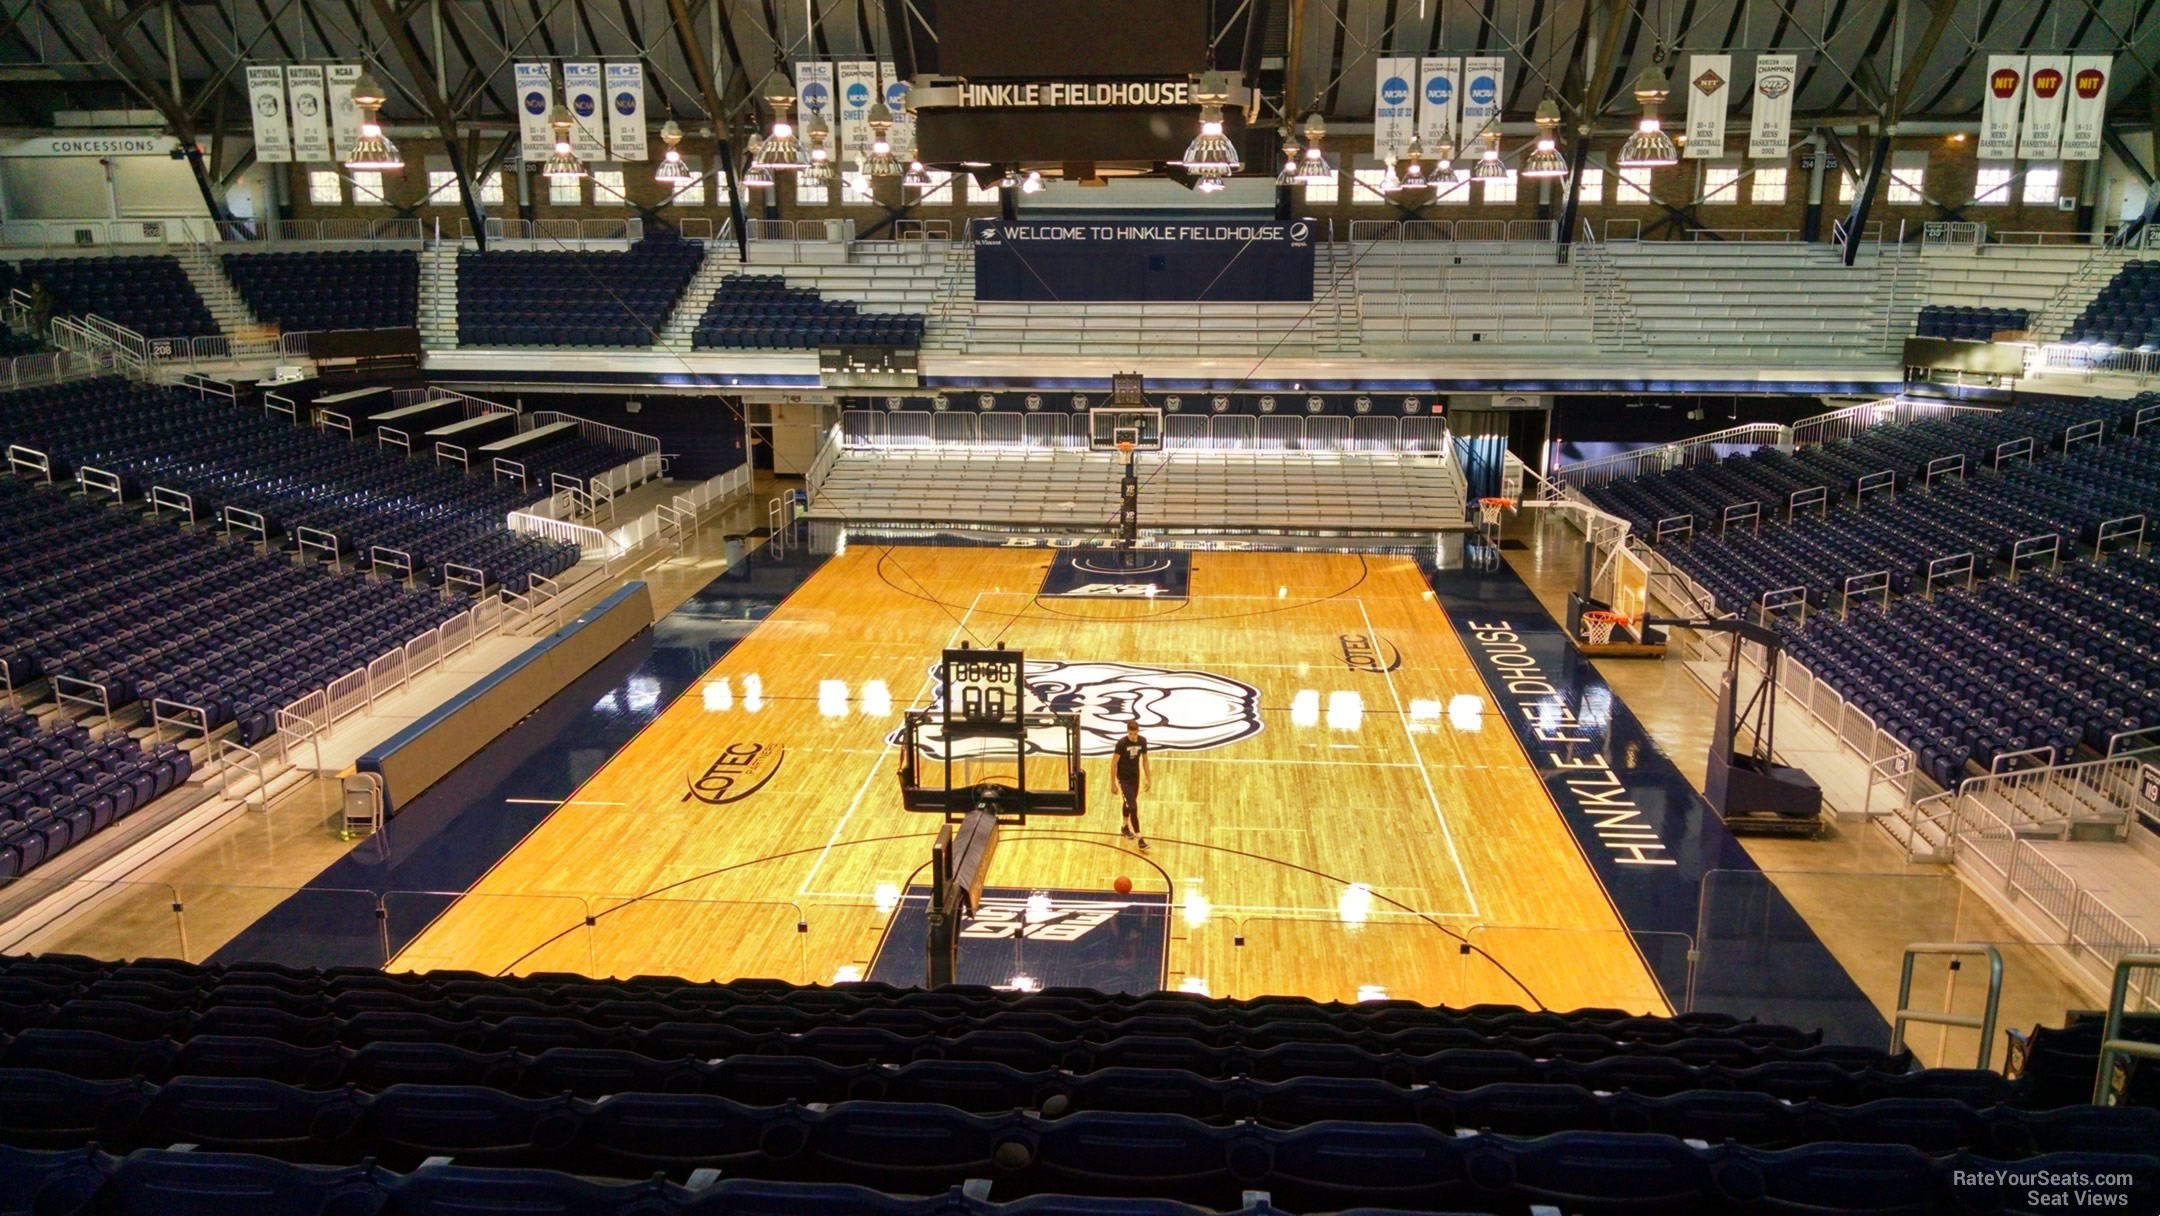 section 224, row 10 seat view  - hinkle fieldhouse